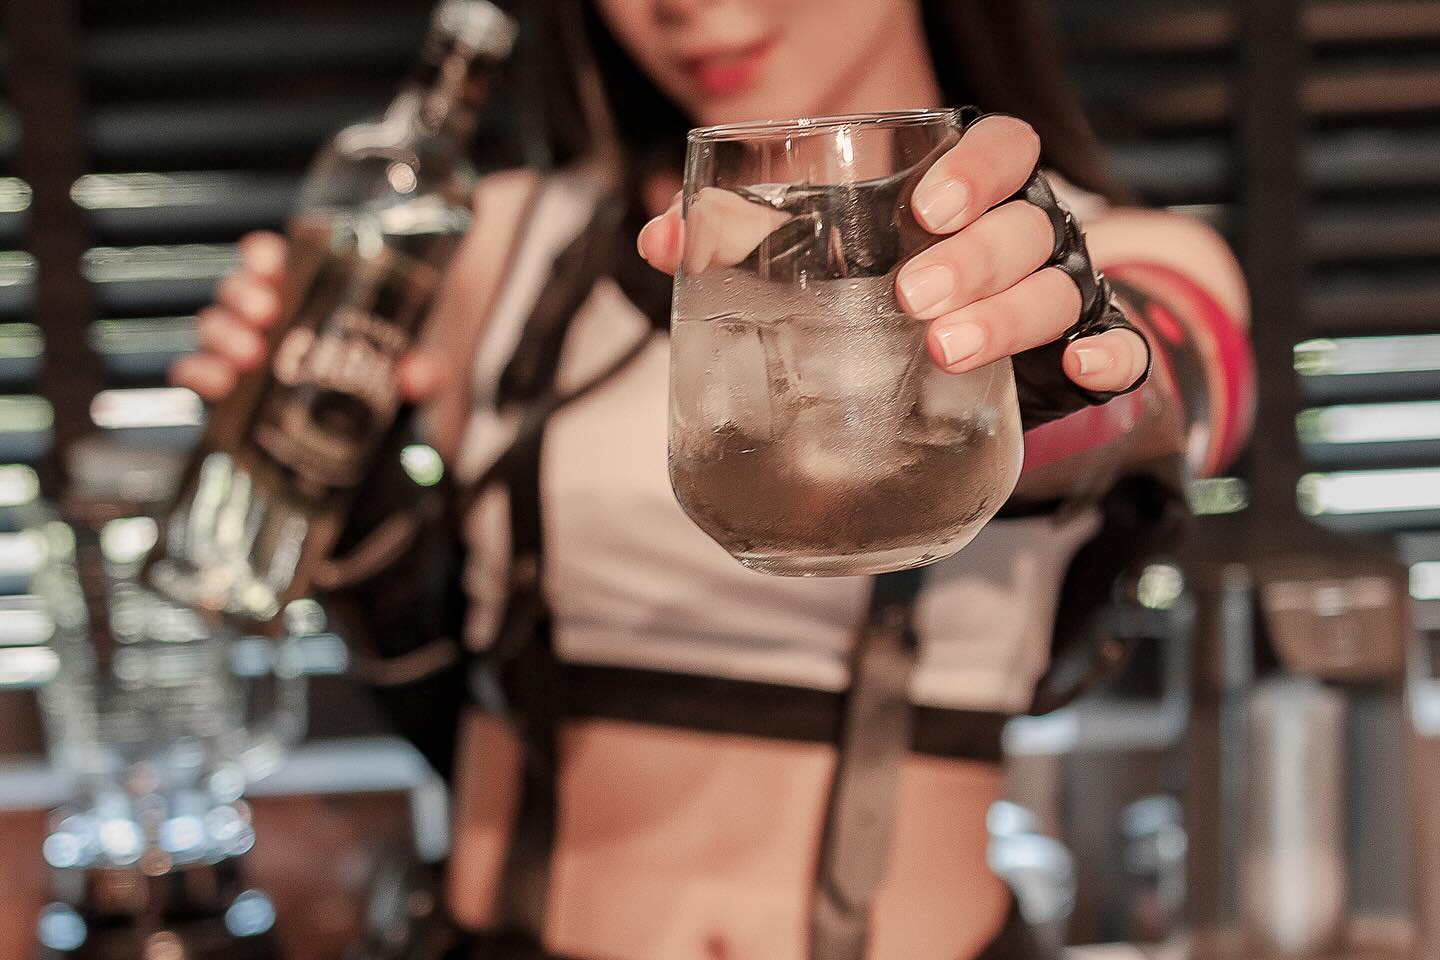 Would you like a drink? 🥃 
Just to make your Friday happy ☺️ #tifalockhart